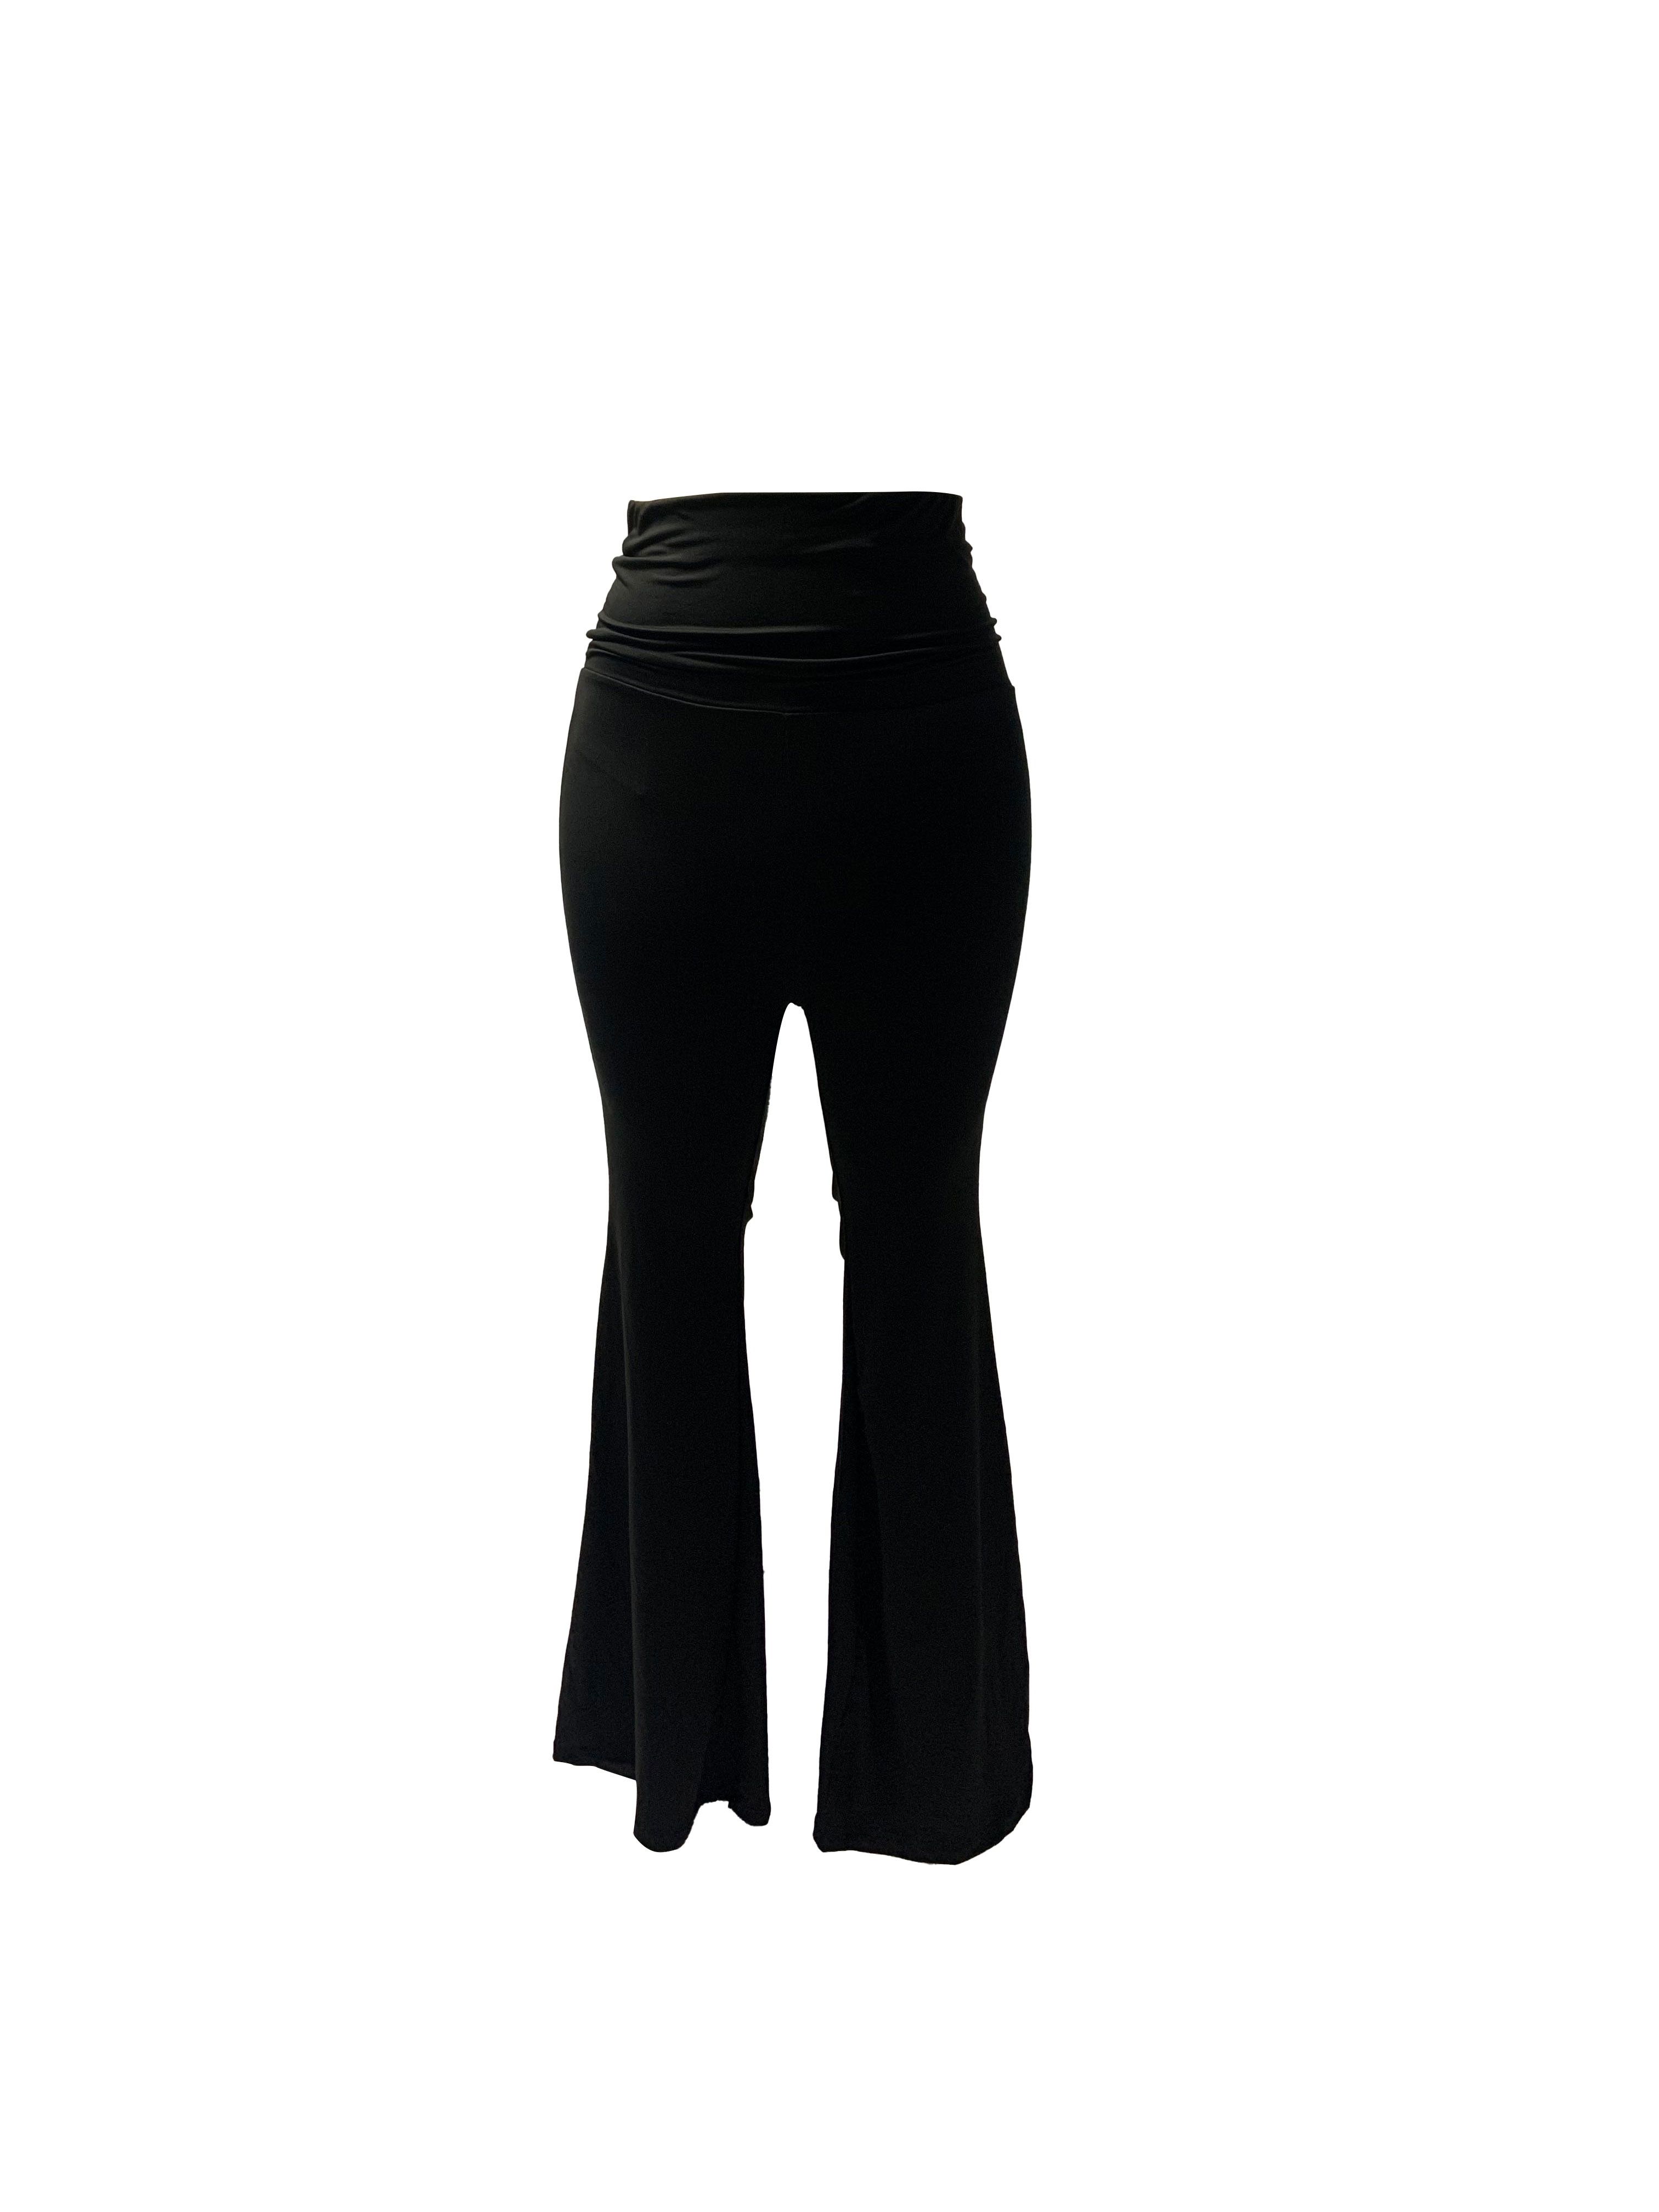 NEW Zella Barely Flare Live in High Waist Pants - Black - Size 4